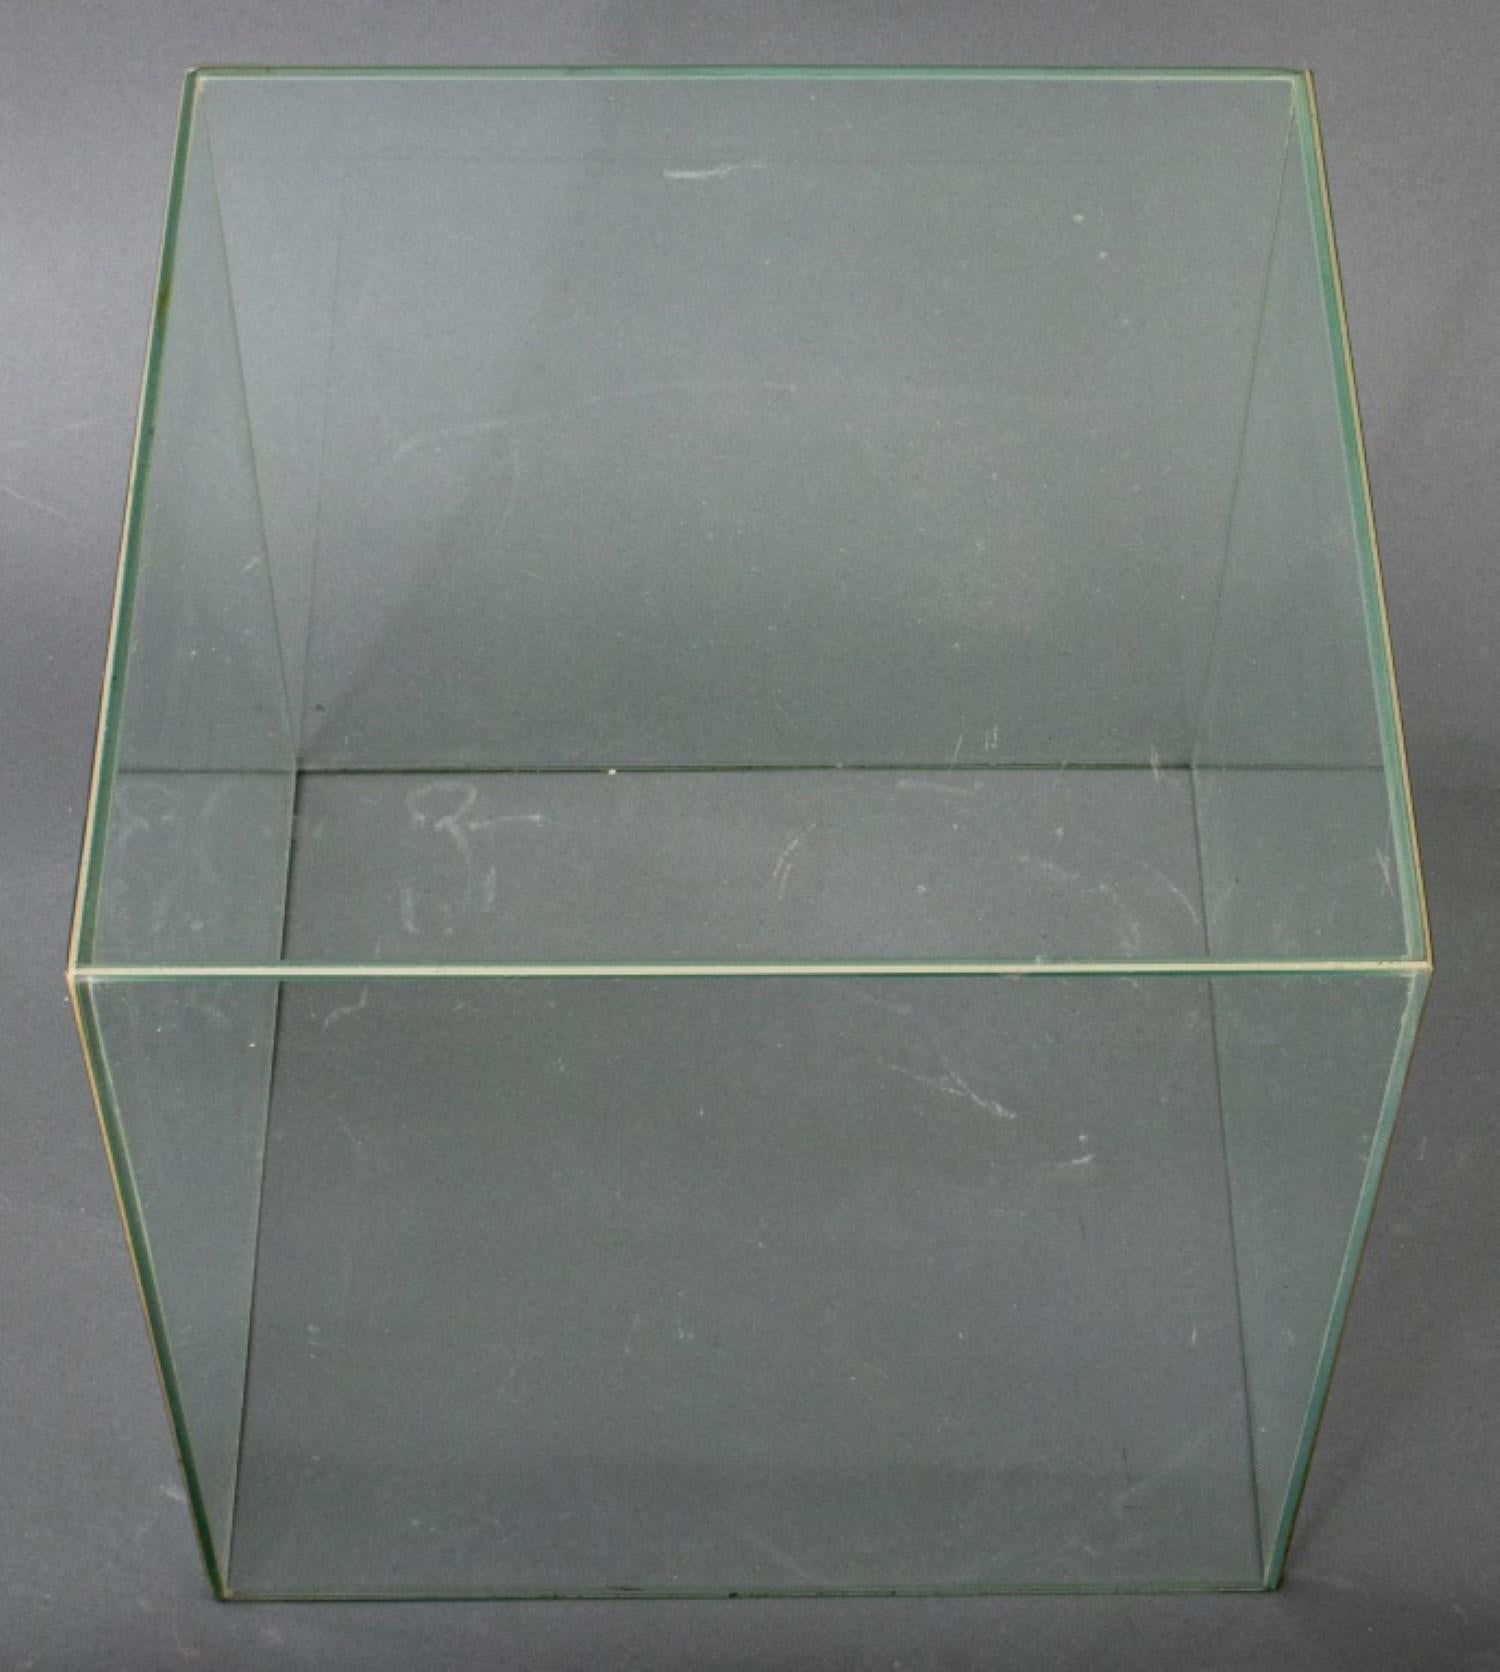 
The dimensions for the Modernist glass cube side or end table are:

Height: 15